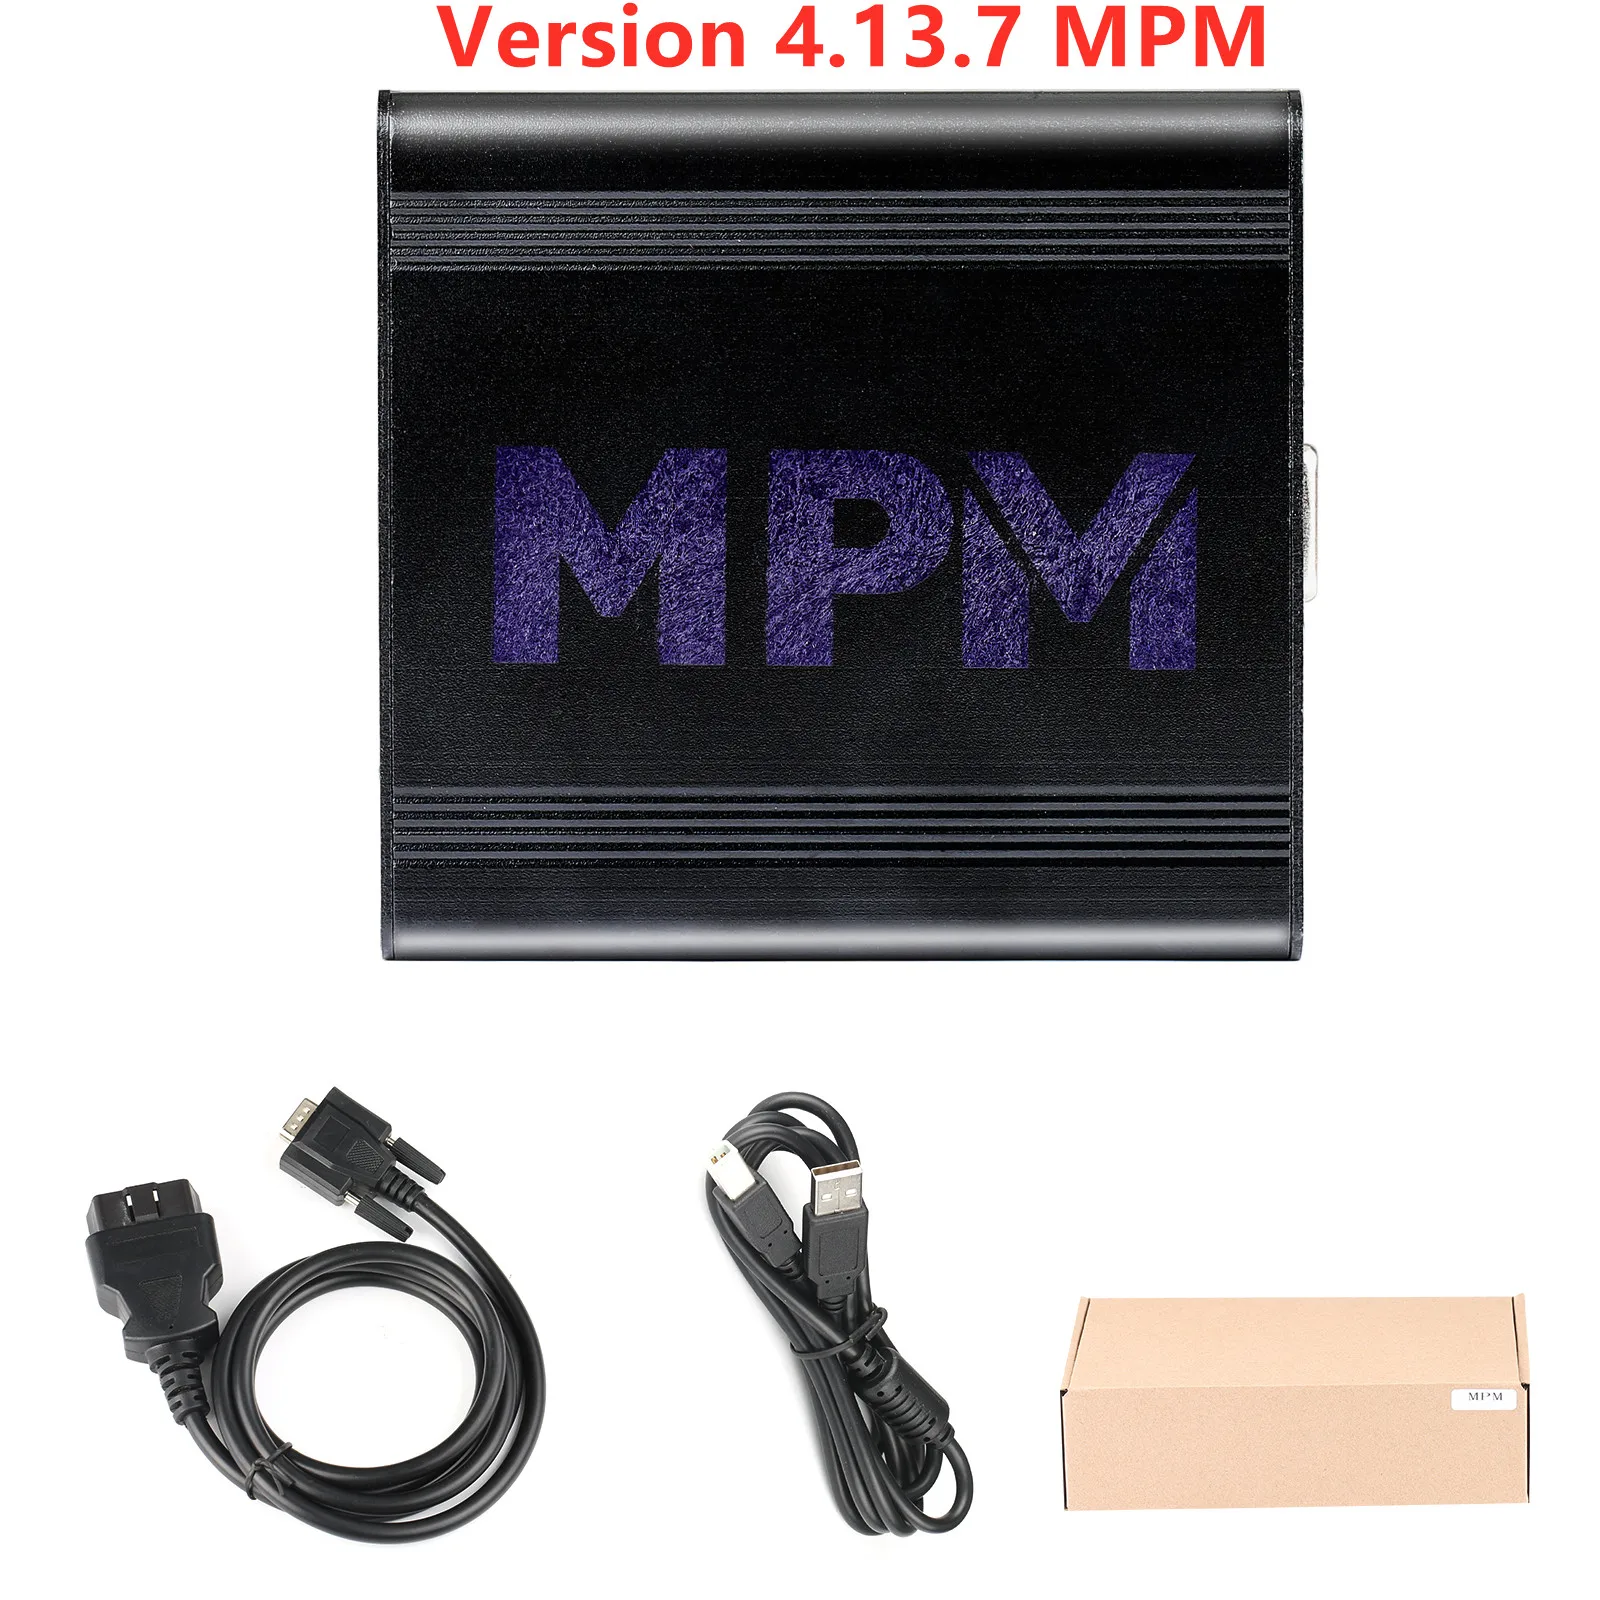 

A+ Version 4.13.7 MPM OTG ECU TCU Chip Tuning Programming Tool with VCM Suite from PCMTuner Team for American Car ECU All in OBD